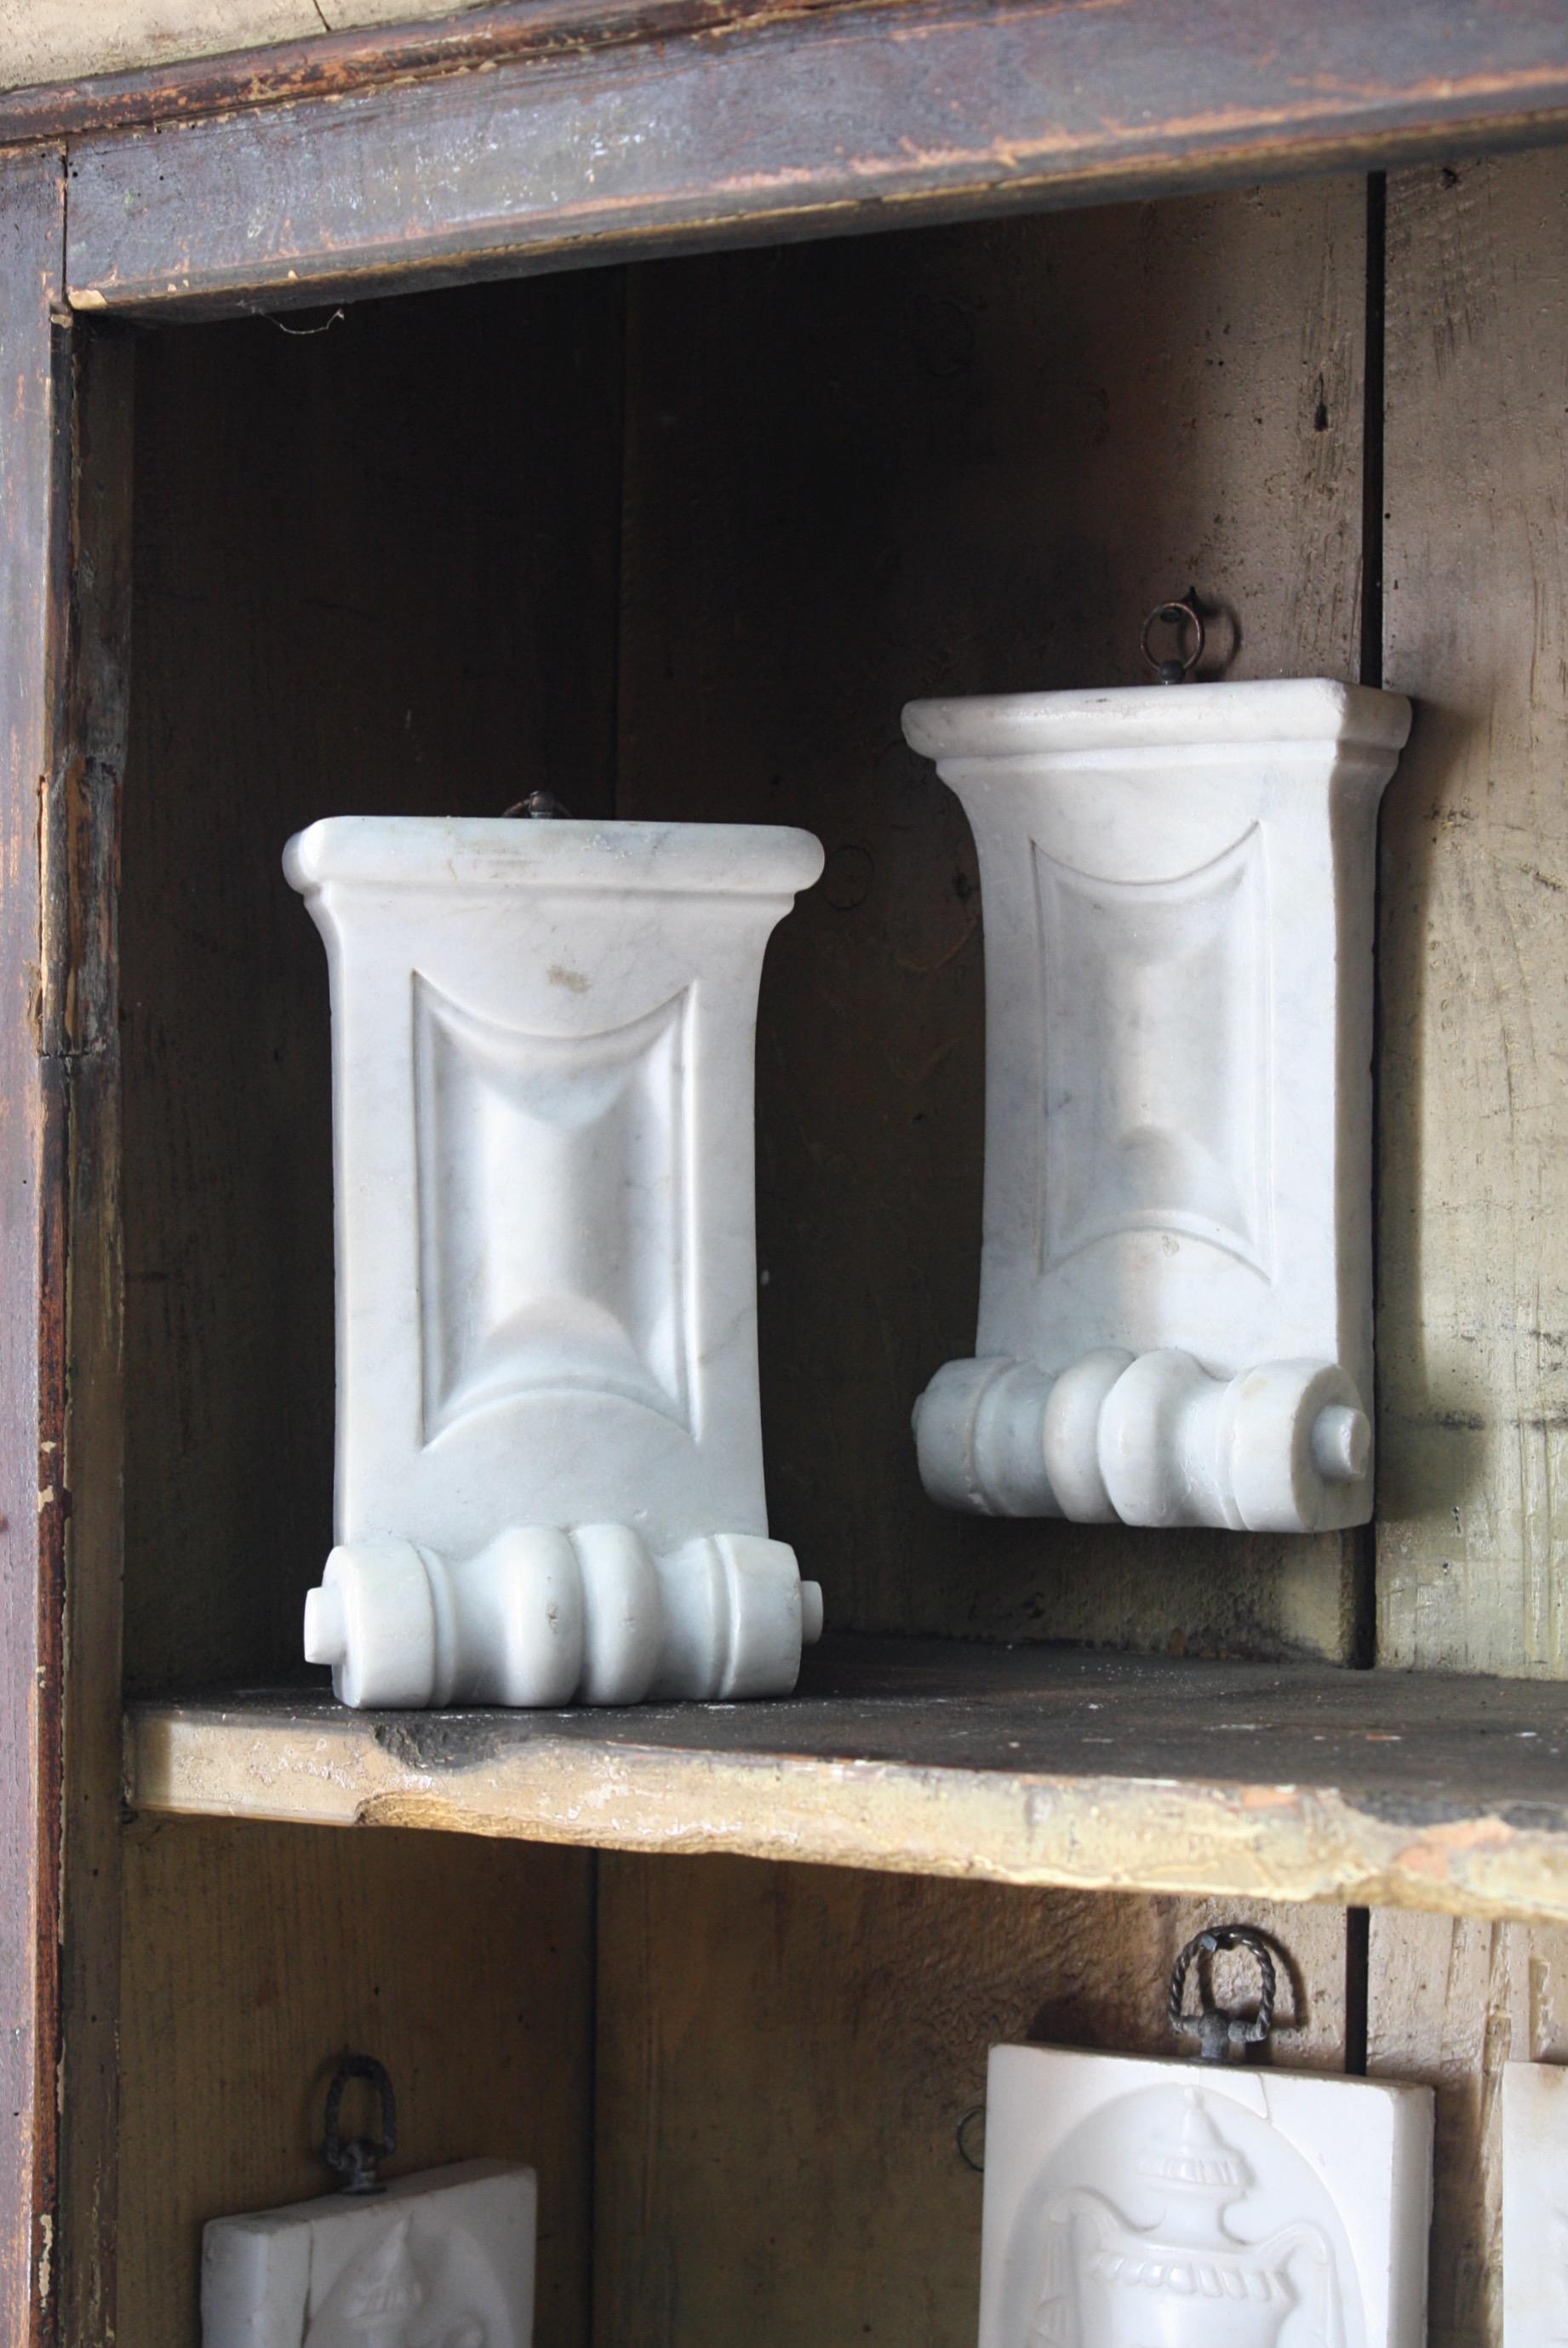 A pair of marble elements with a well carved restrained design, previously part of larger architectural feature like a grand fireplace.

Each section has a good decorative patina, Dating from the early 19th century and English in origin.

Both